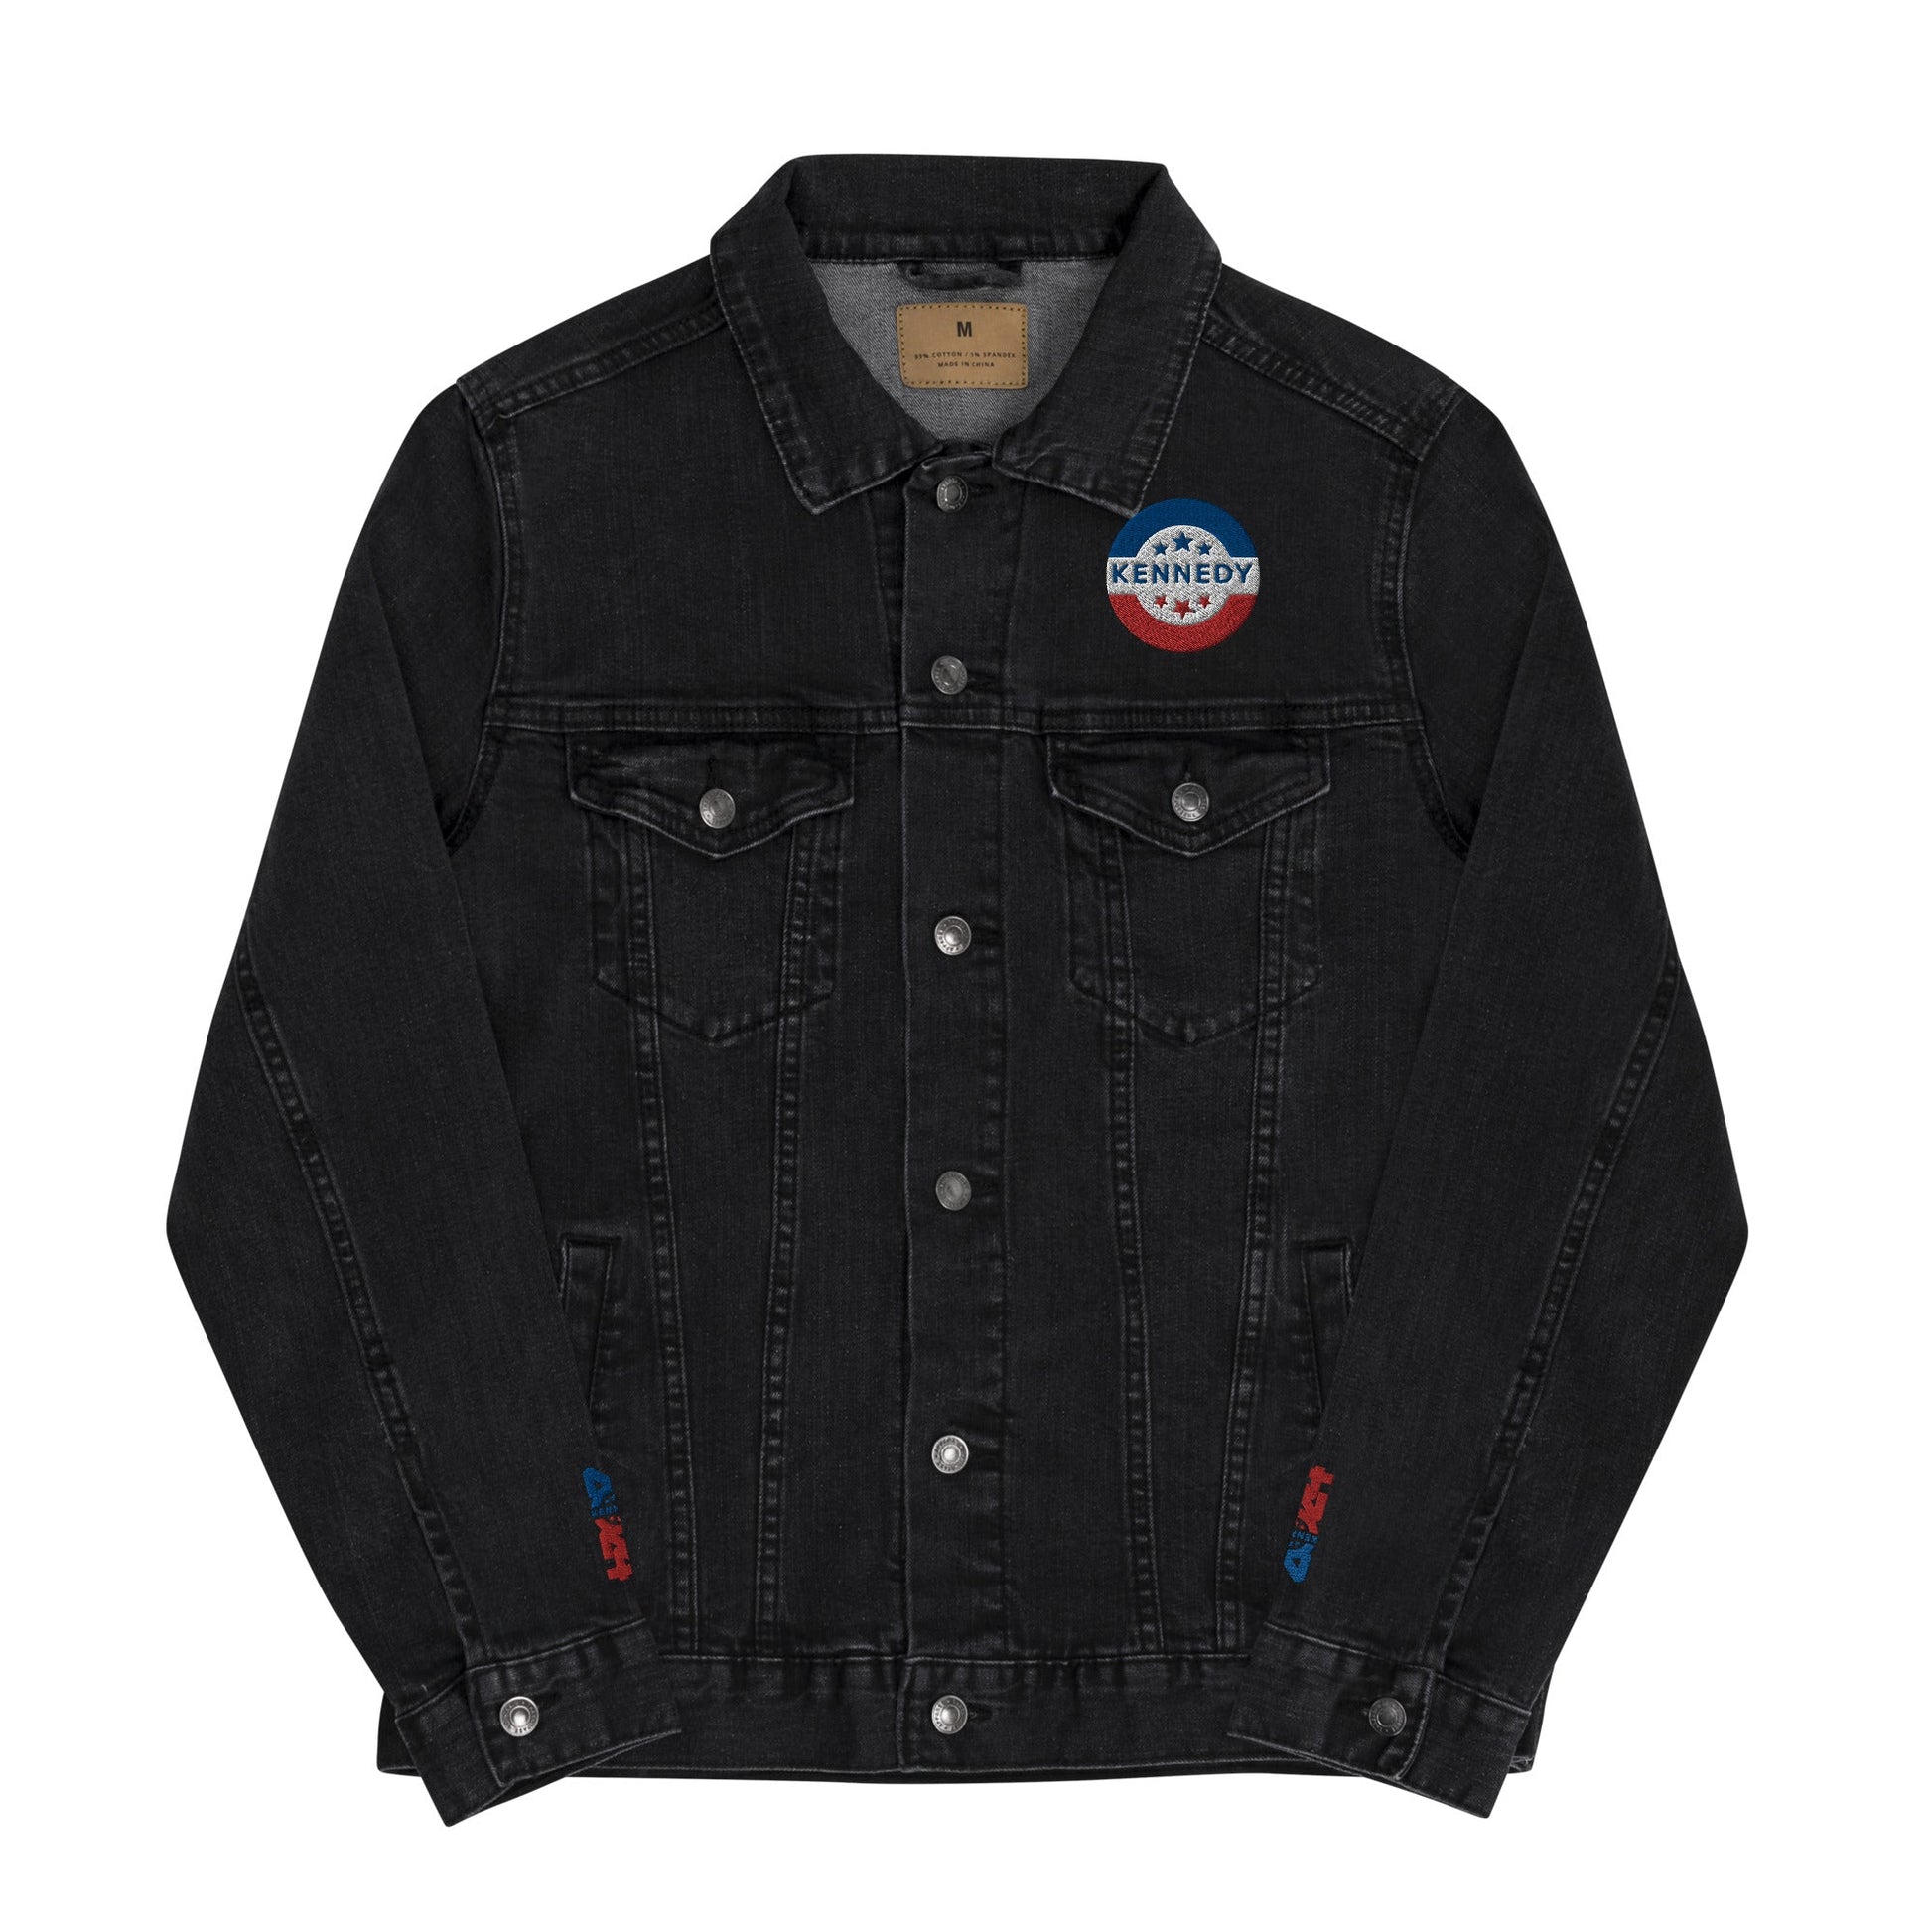 Kennedy Denim Jacket - TEAM KENNEDY. All rights reserved